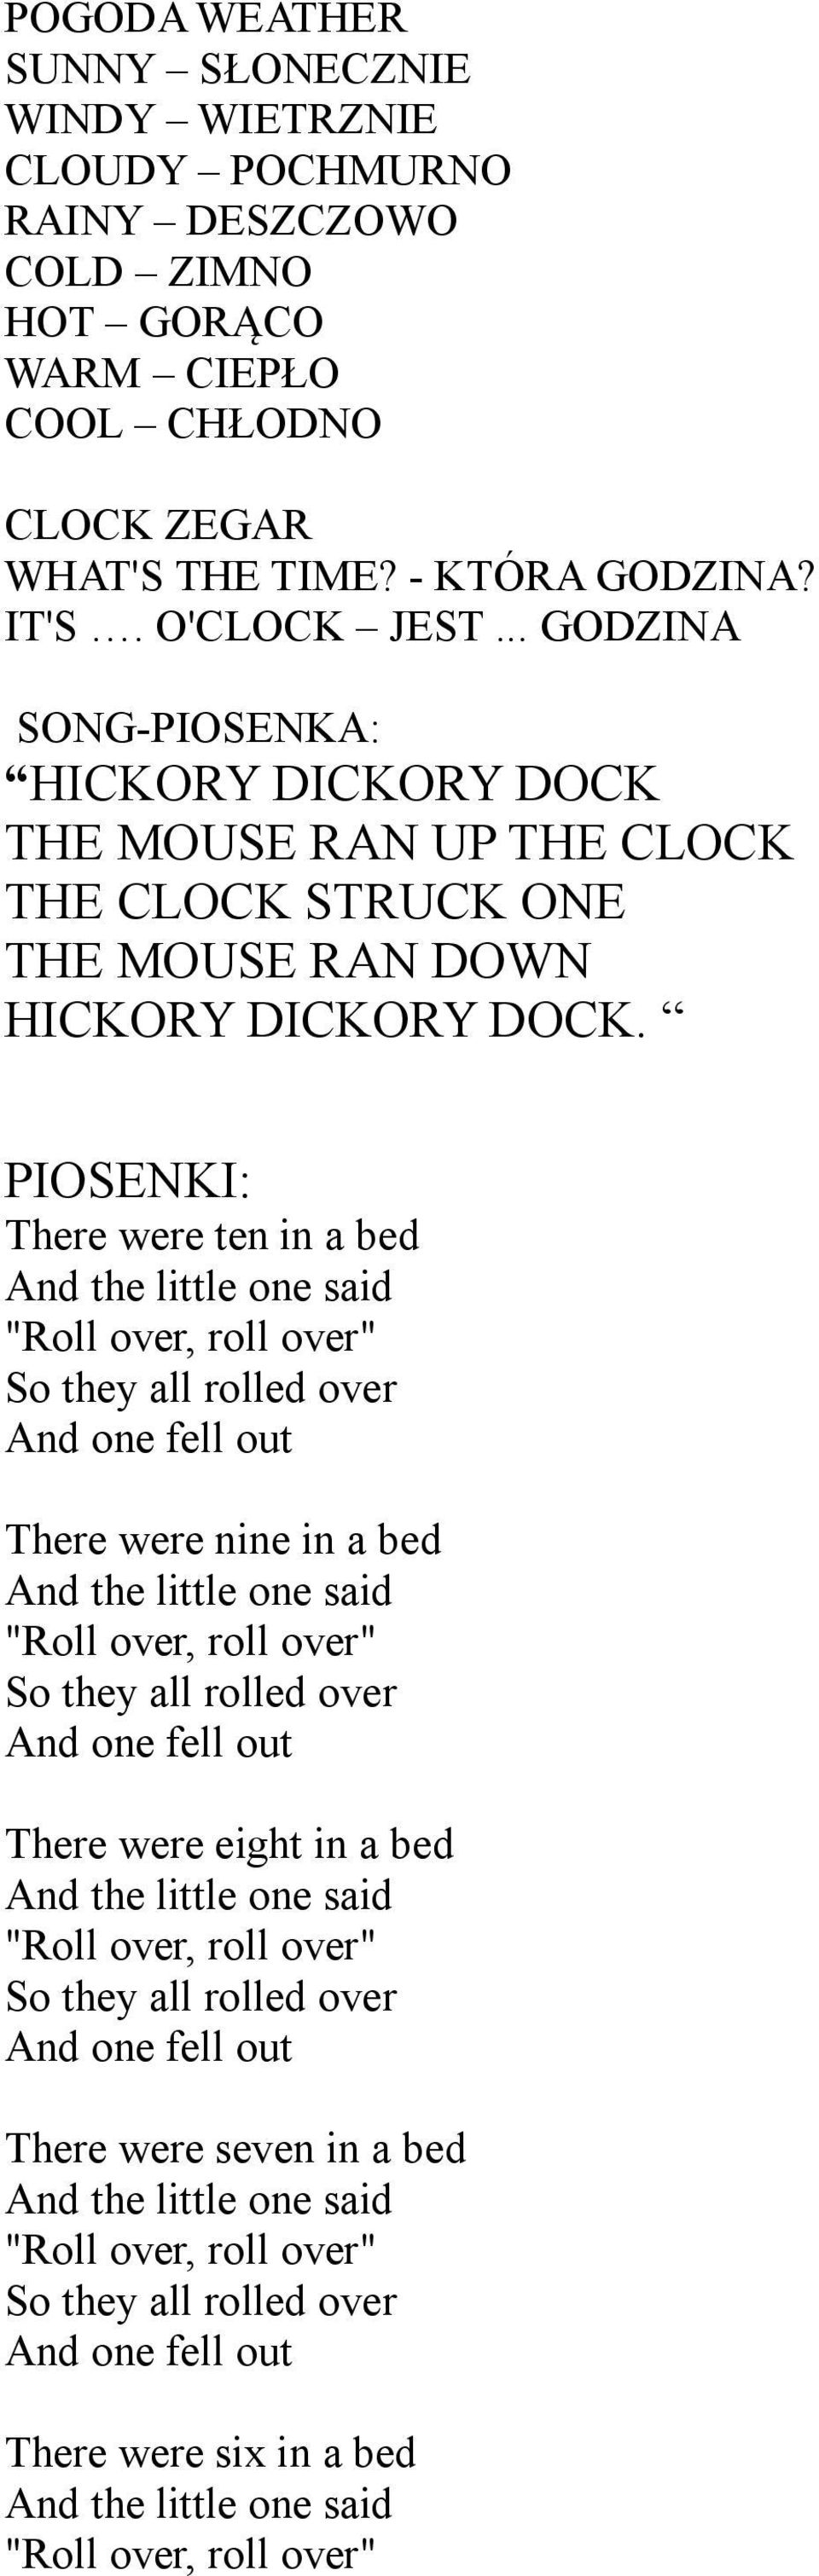 PIOSENKI: There were ten in a bed And the little one said "Roll over, roll over" So they all rolled over And one fell out There were nine in a bed And the little one said "Roll over, roll over" So